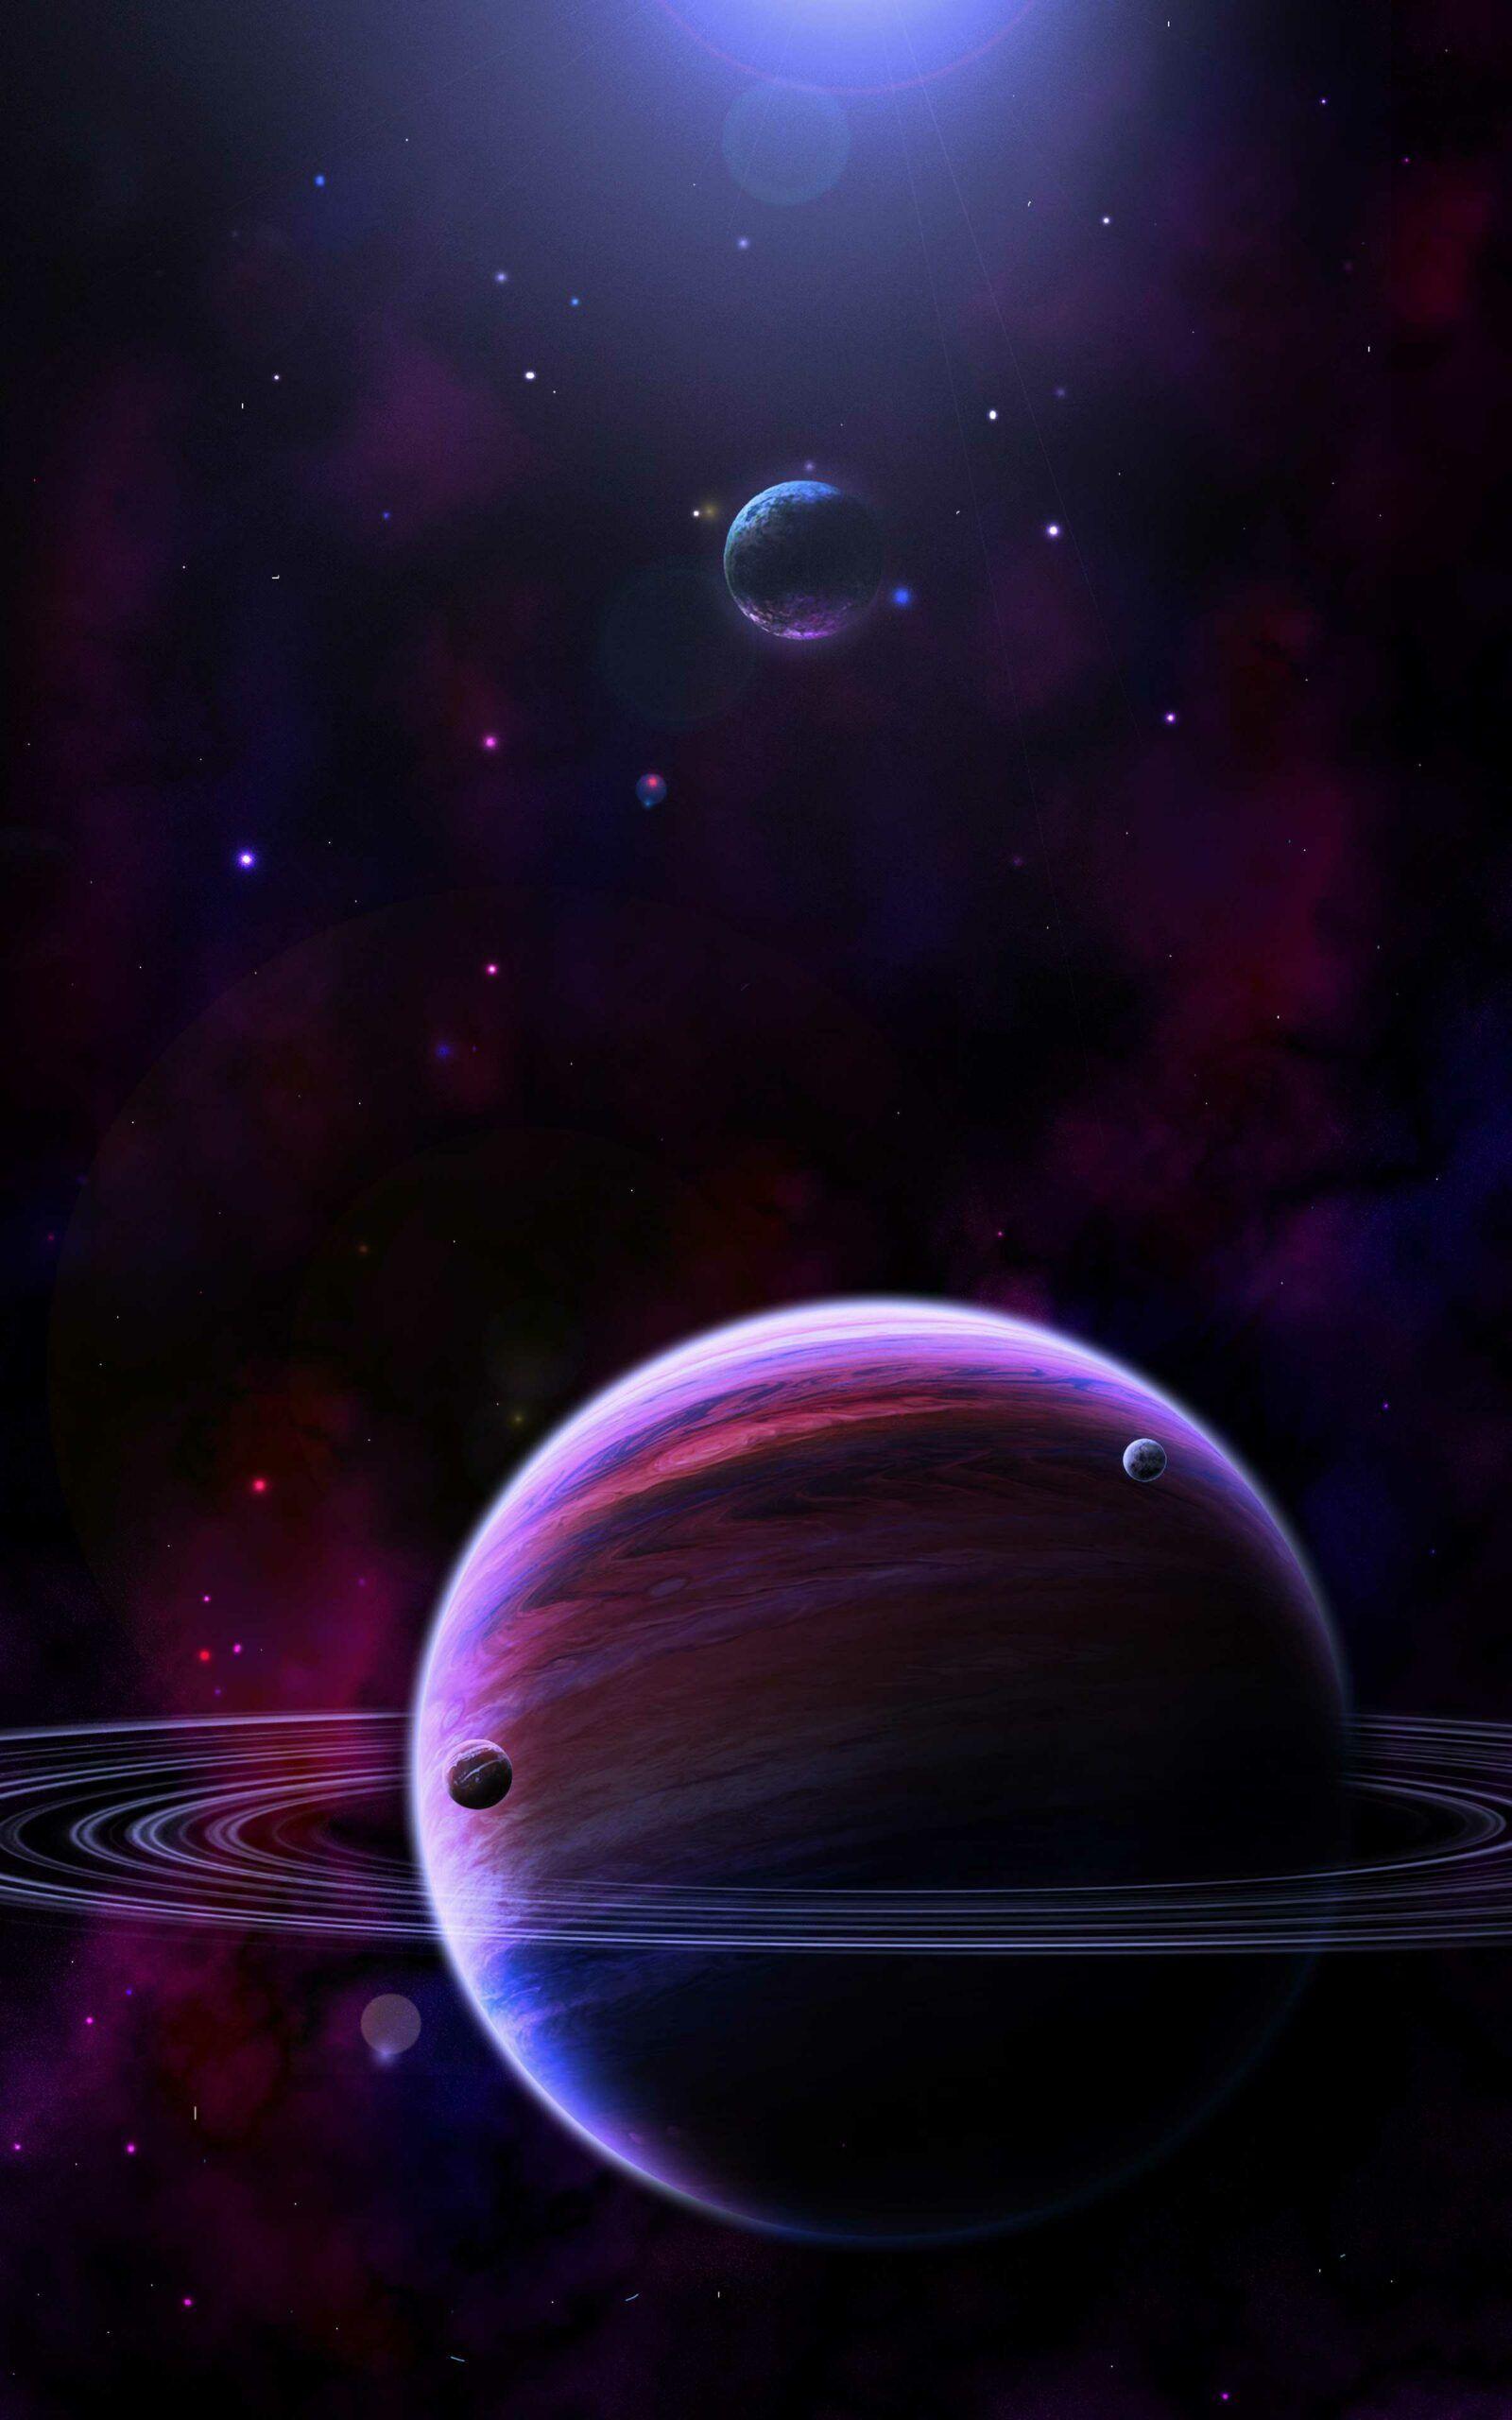 Saturn Aesthetic Wallpapers Top Free Saturn Aesthetic Backgrounds Wallpaperaccess 5714